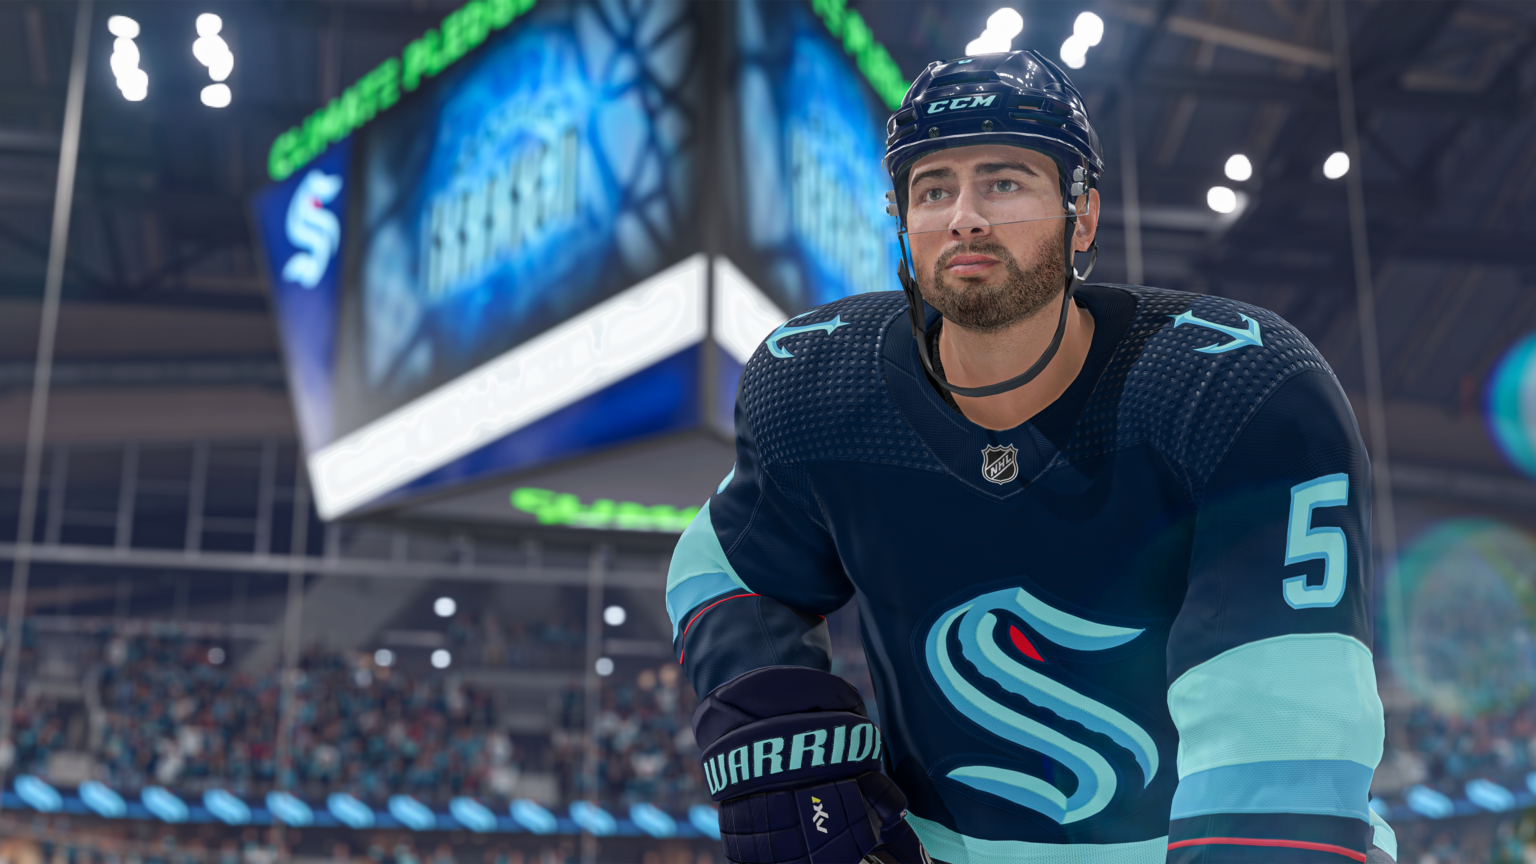 nhl 22 review